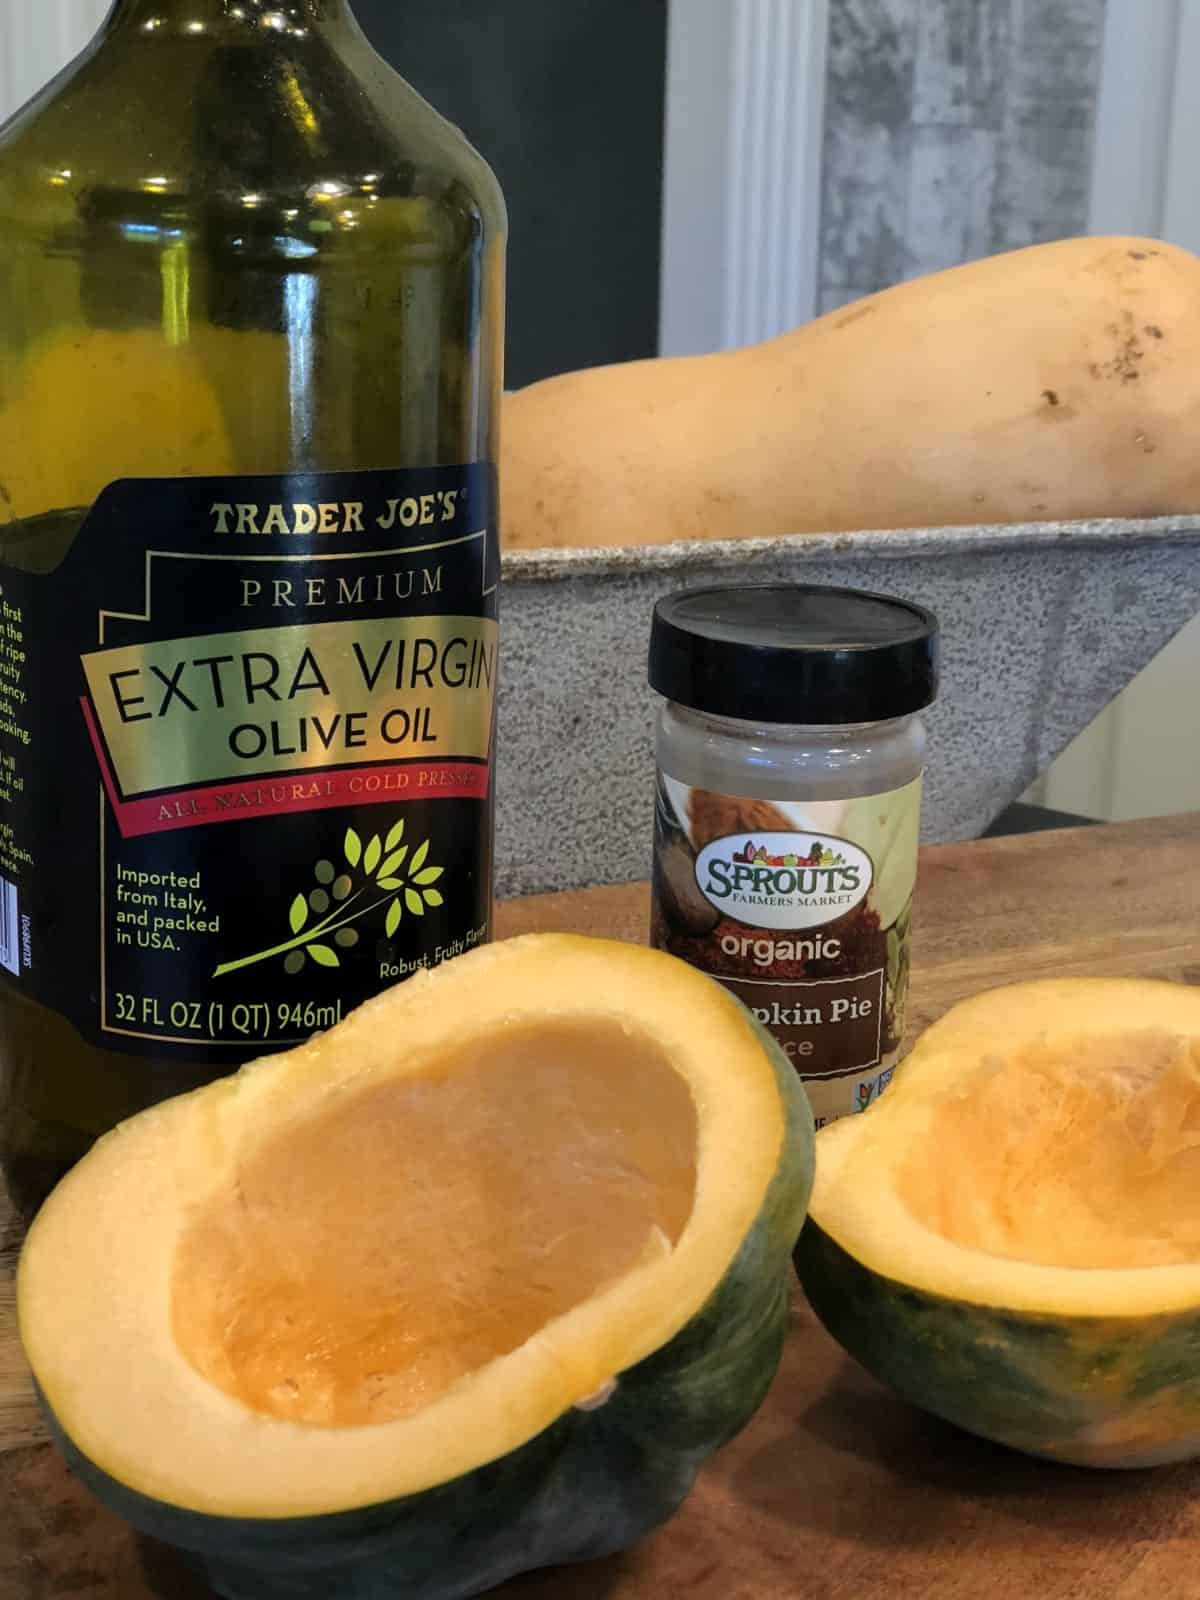 Halved acorn squash with bottle of olive oil and pumpkin pie spice.